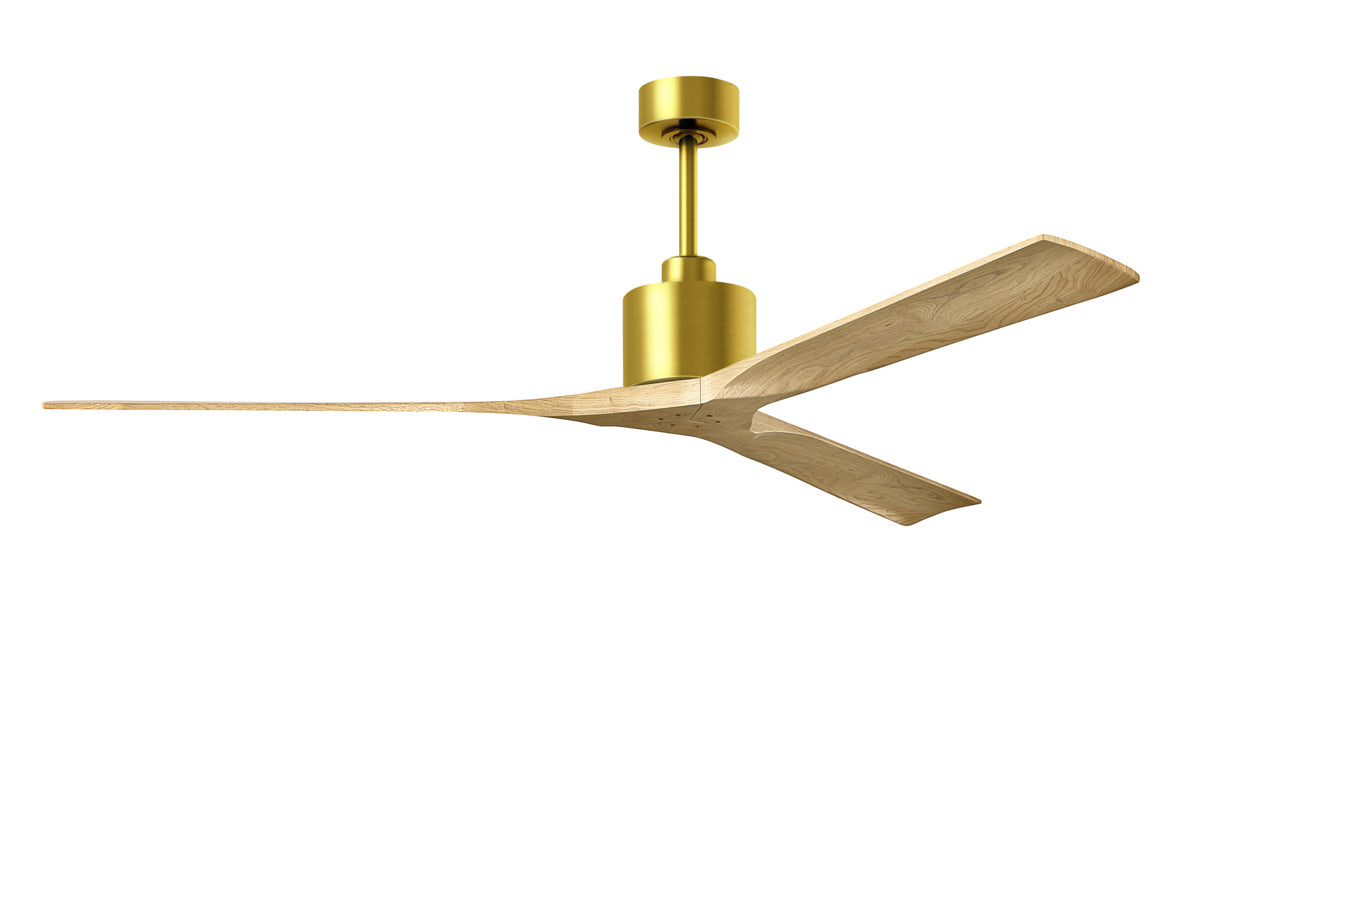 Nan XL ceiling fan in Brushed Brass with 72” Light Maple blades